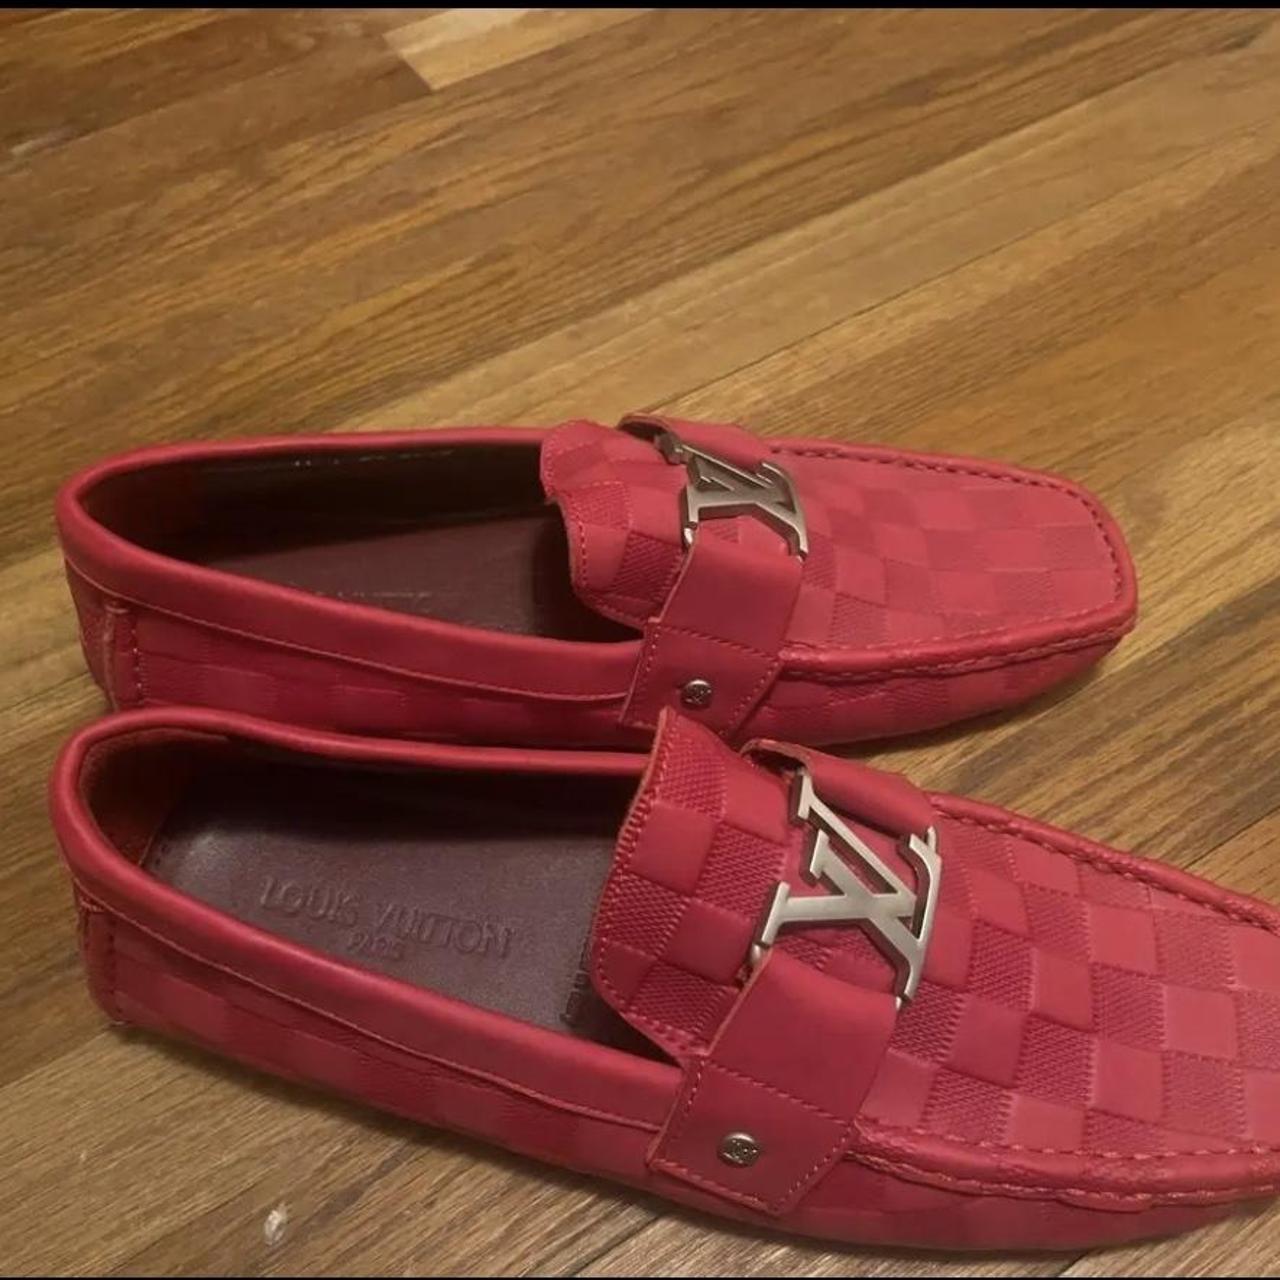 Louis Vuitton Monte Carlo loafers